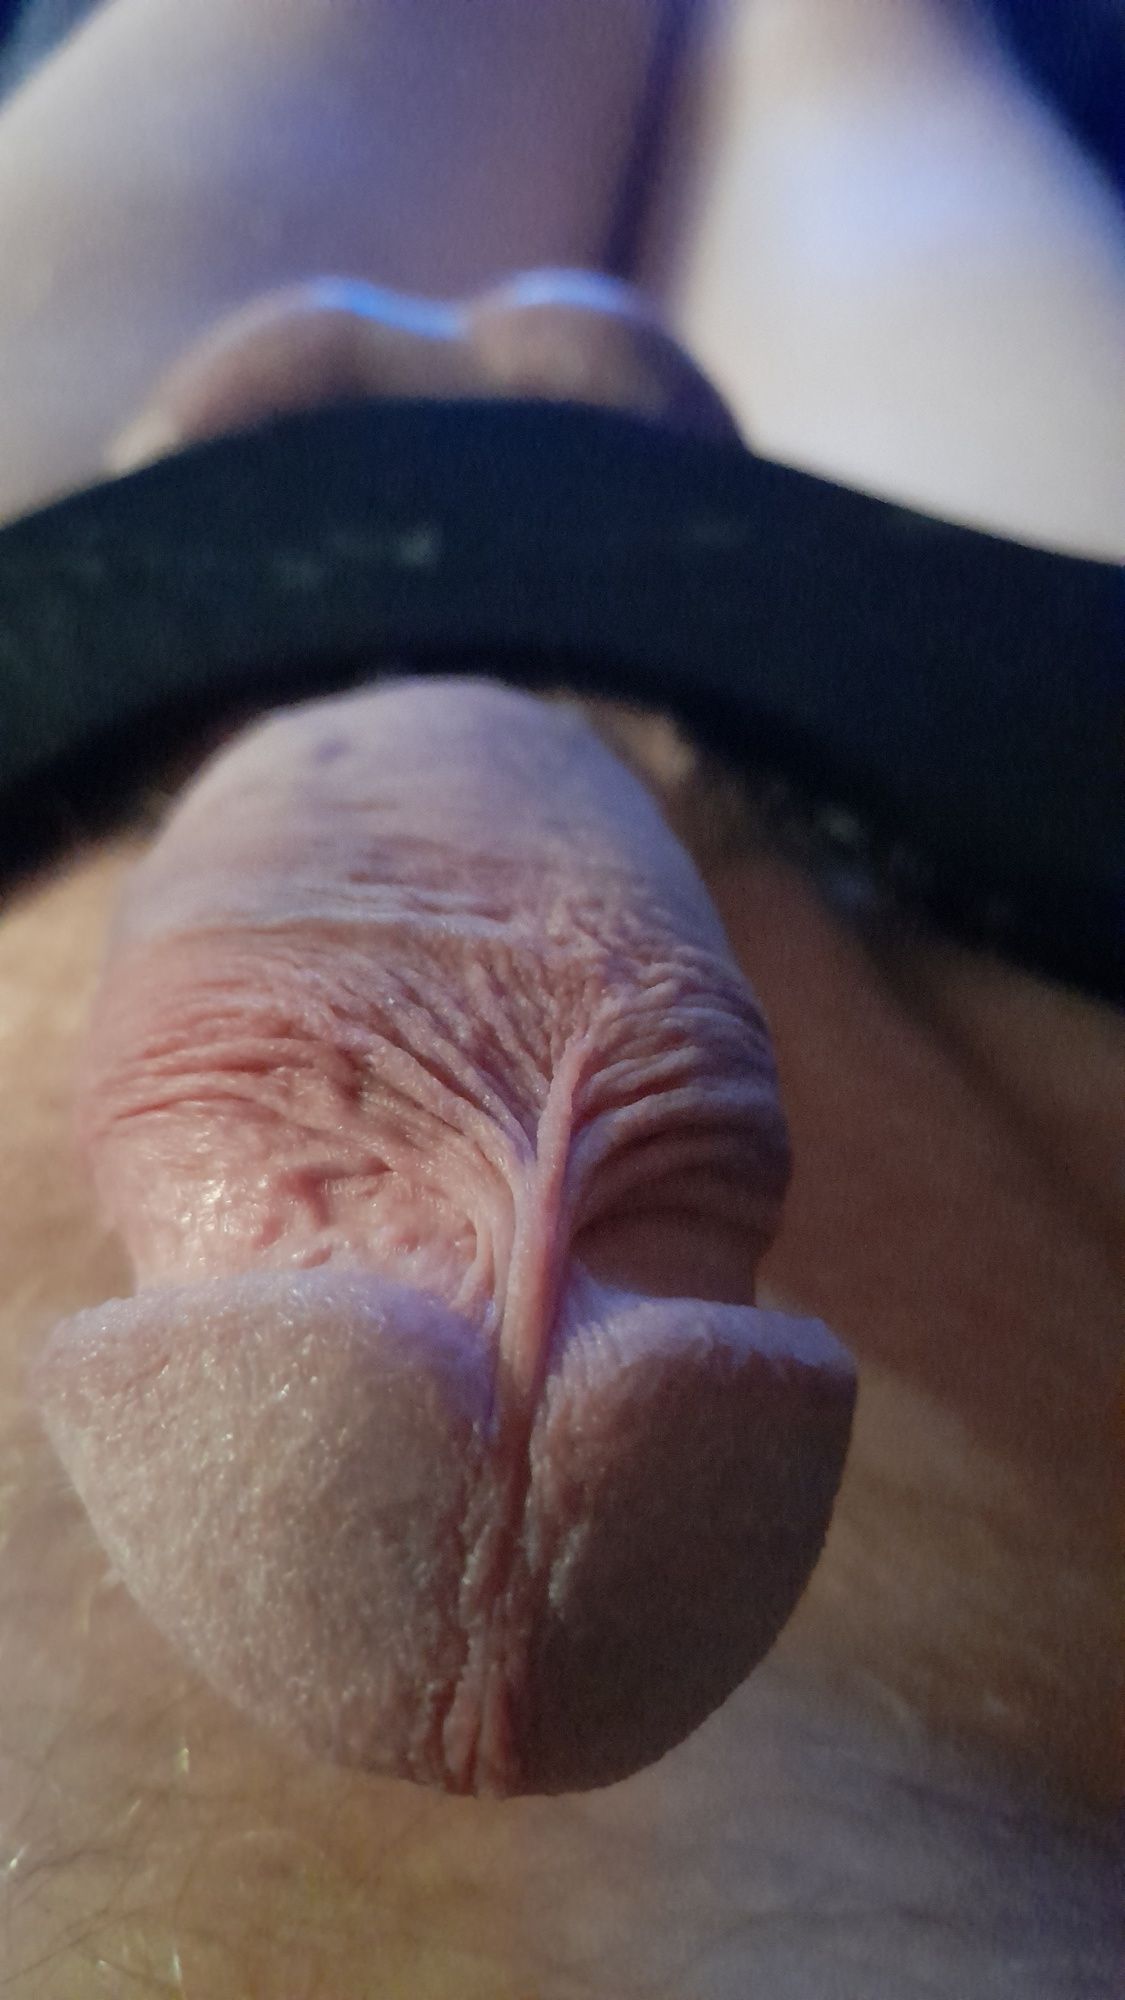 many pics of my cock #26